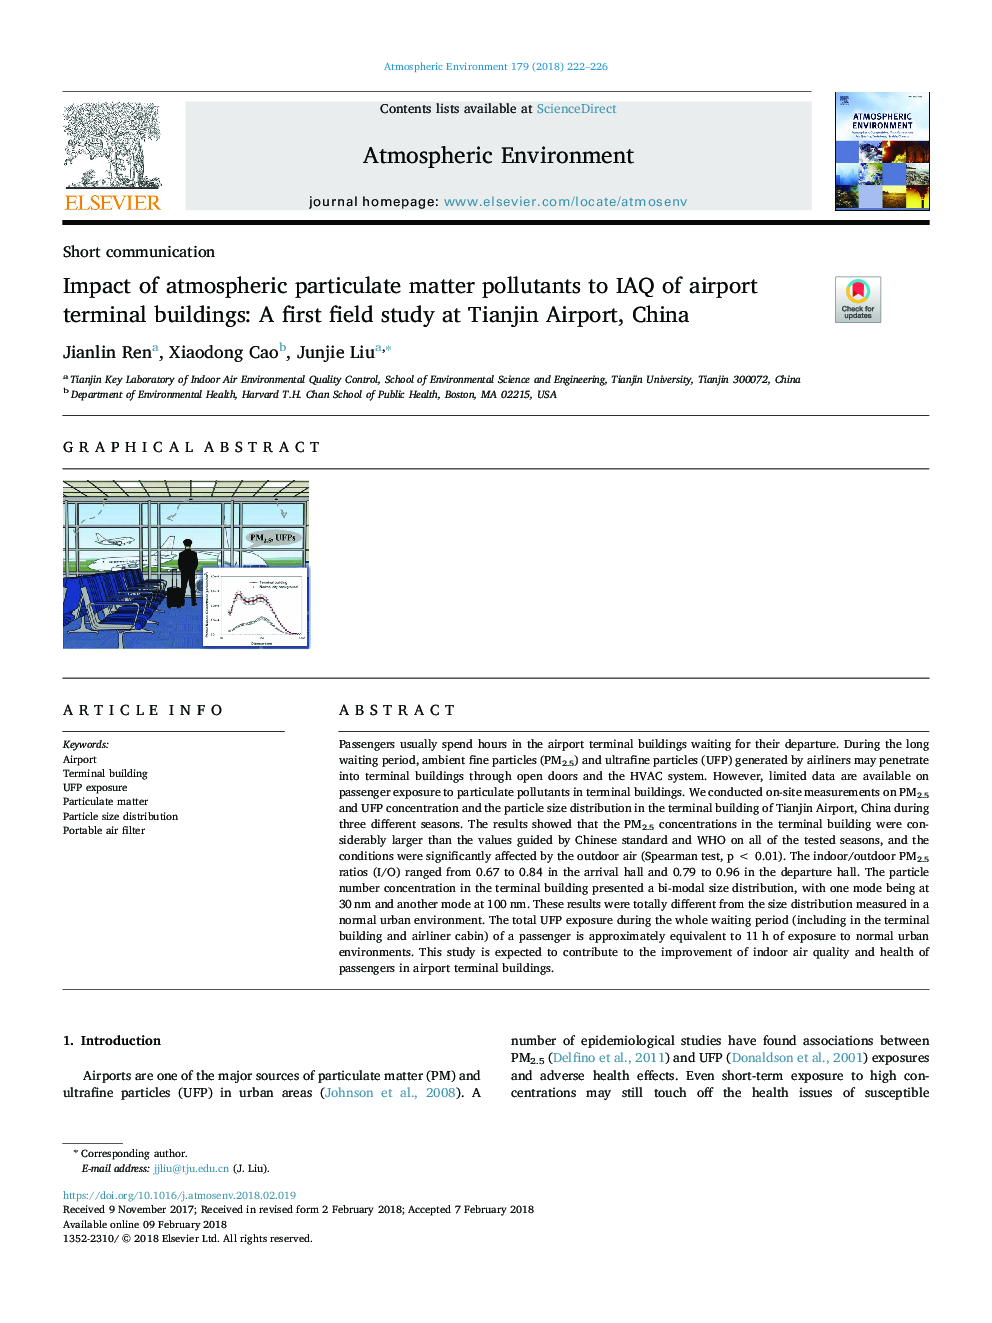 Impact of atmospheric particulate matter pollutants to IAQ of airport terminal buildings: A first field study at Tianjin Airport, China